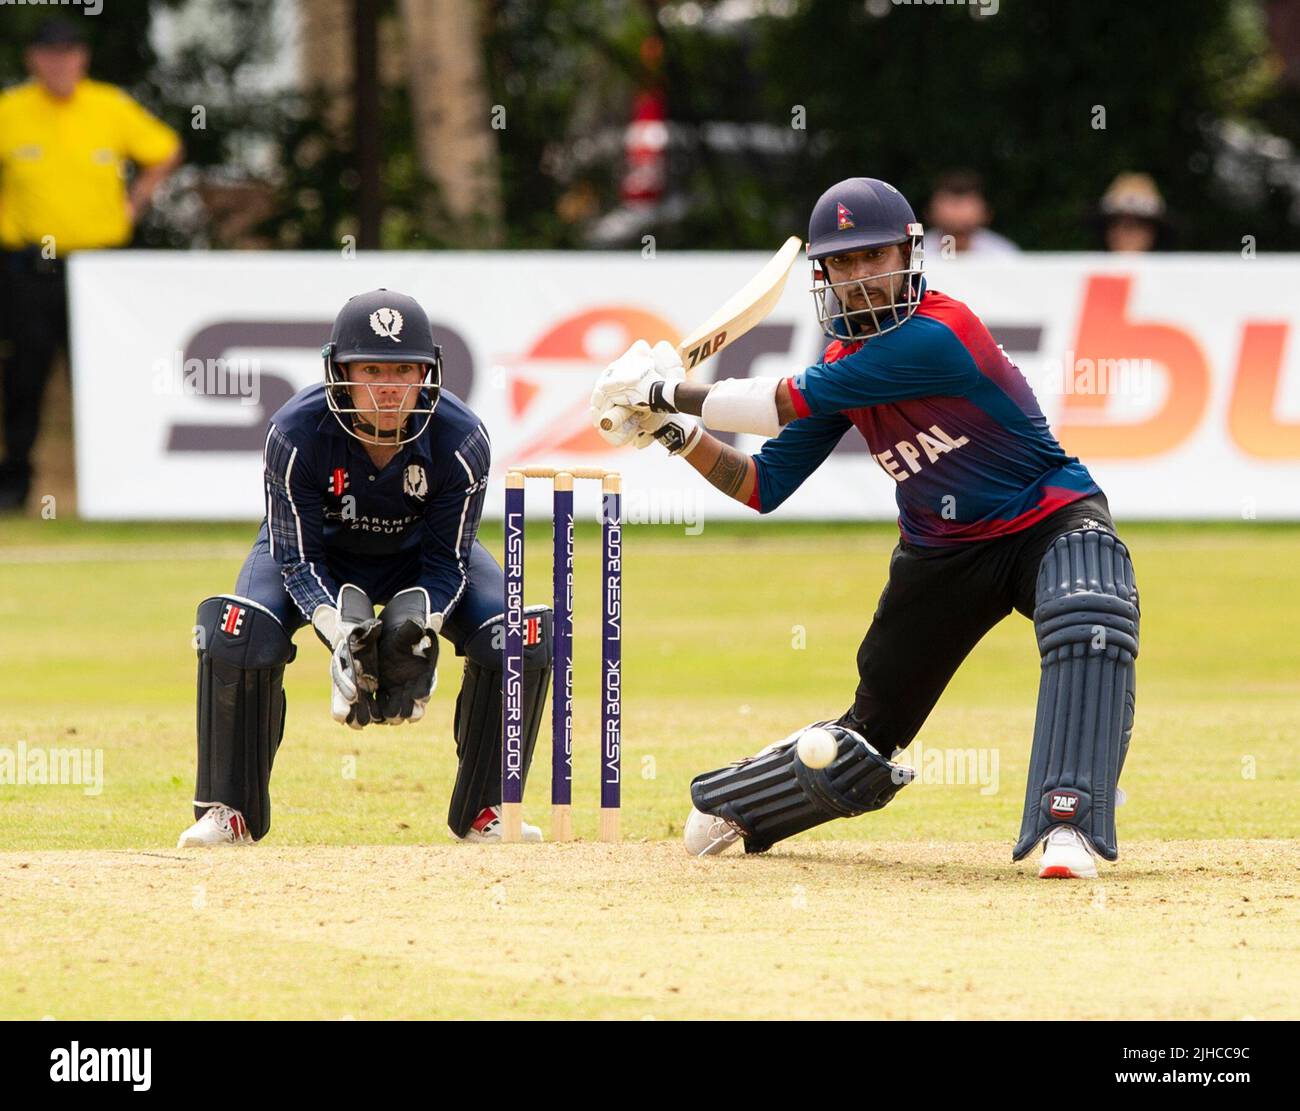 ICC Men's Cricket World Cup League 2 - Scotland v, Nepal. 17th July, 2022. Scotland take on Nepal for the second time in the ICC Div 2 Men's Cricket World Cup League 2 at Titwood, Glasgow. Pic shows: 4 runs for Nepal captain, Sandeep Lamichhane. Credit: Ian Jacobs/Alamy Live News Stock Photo